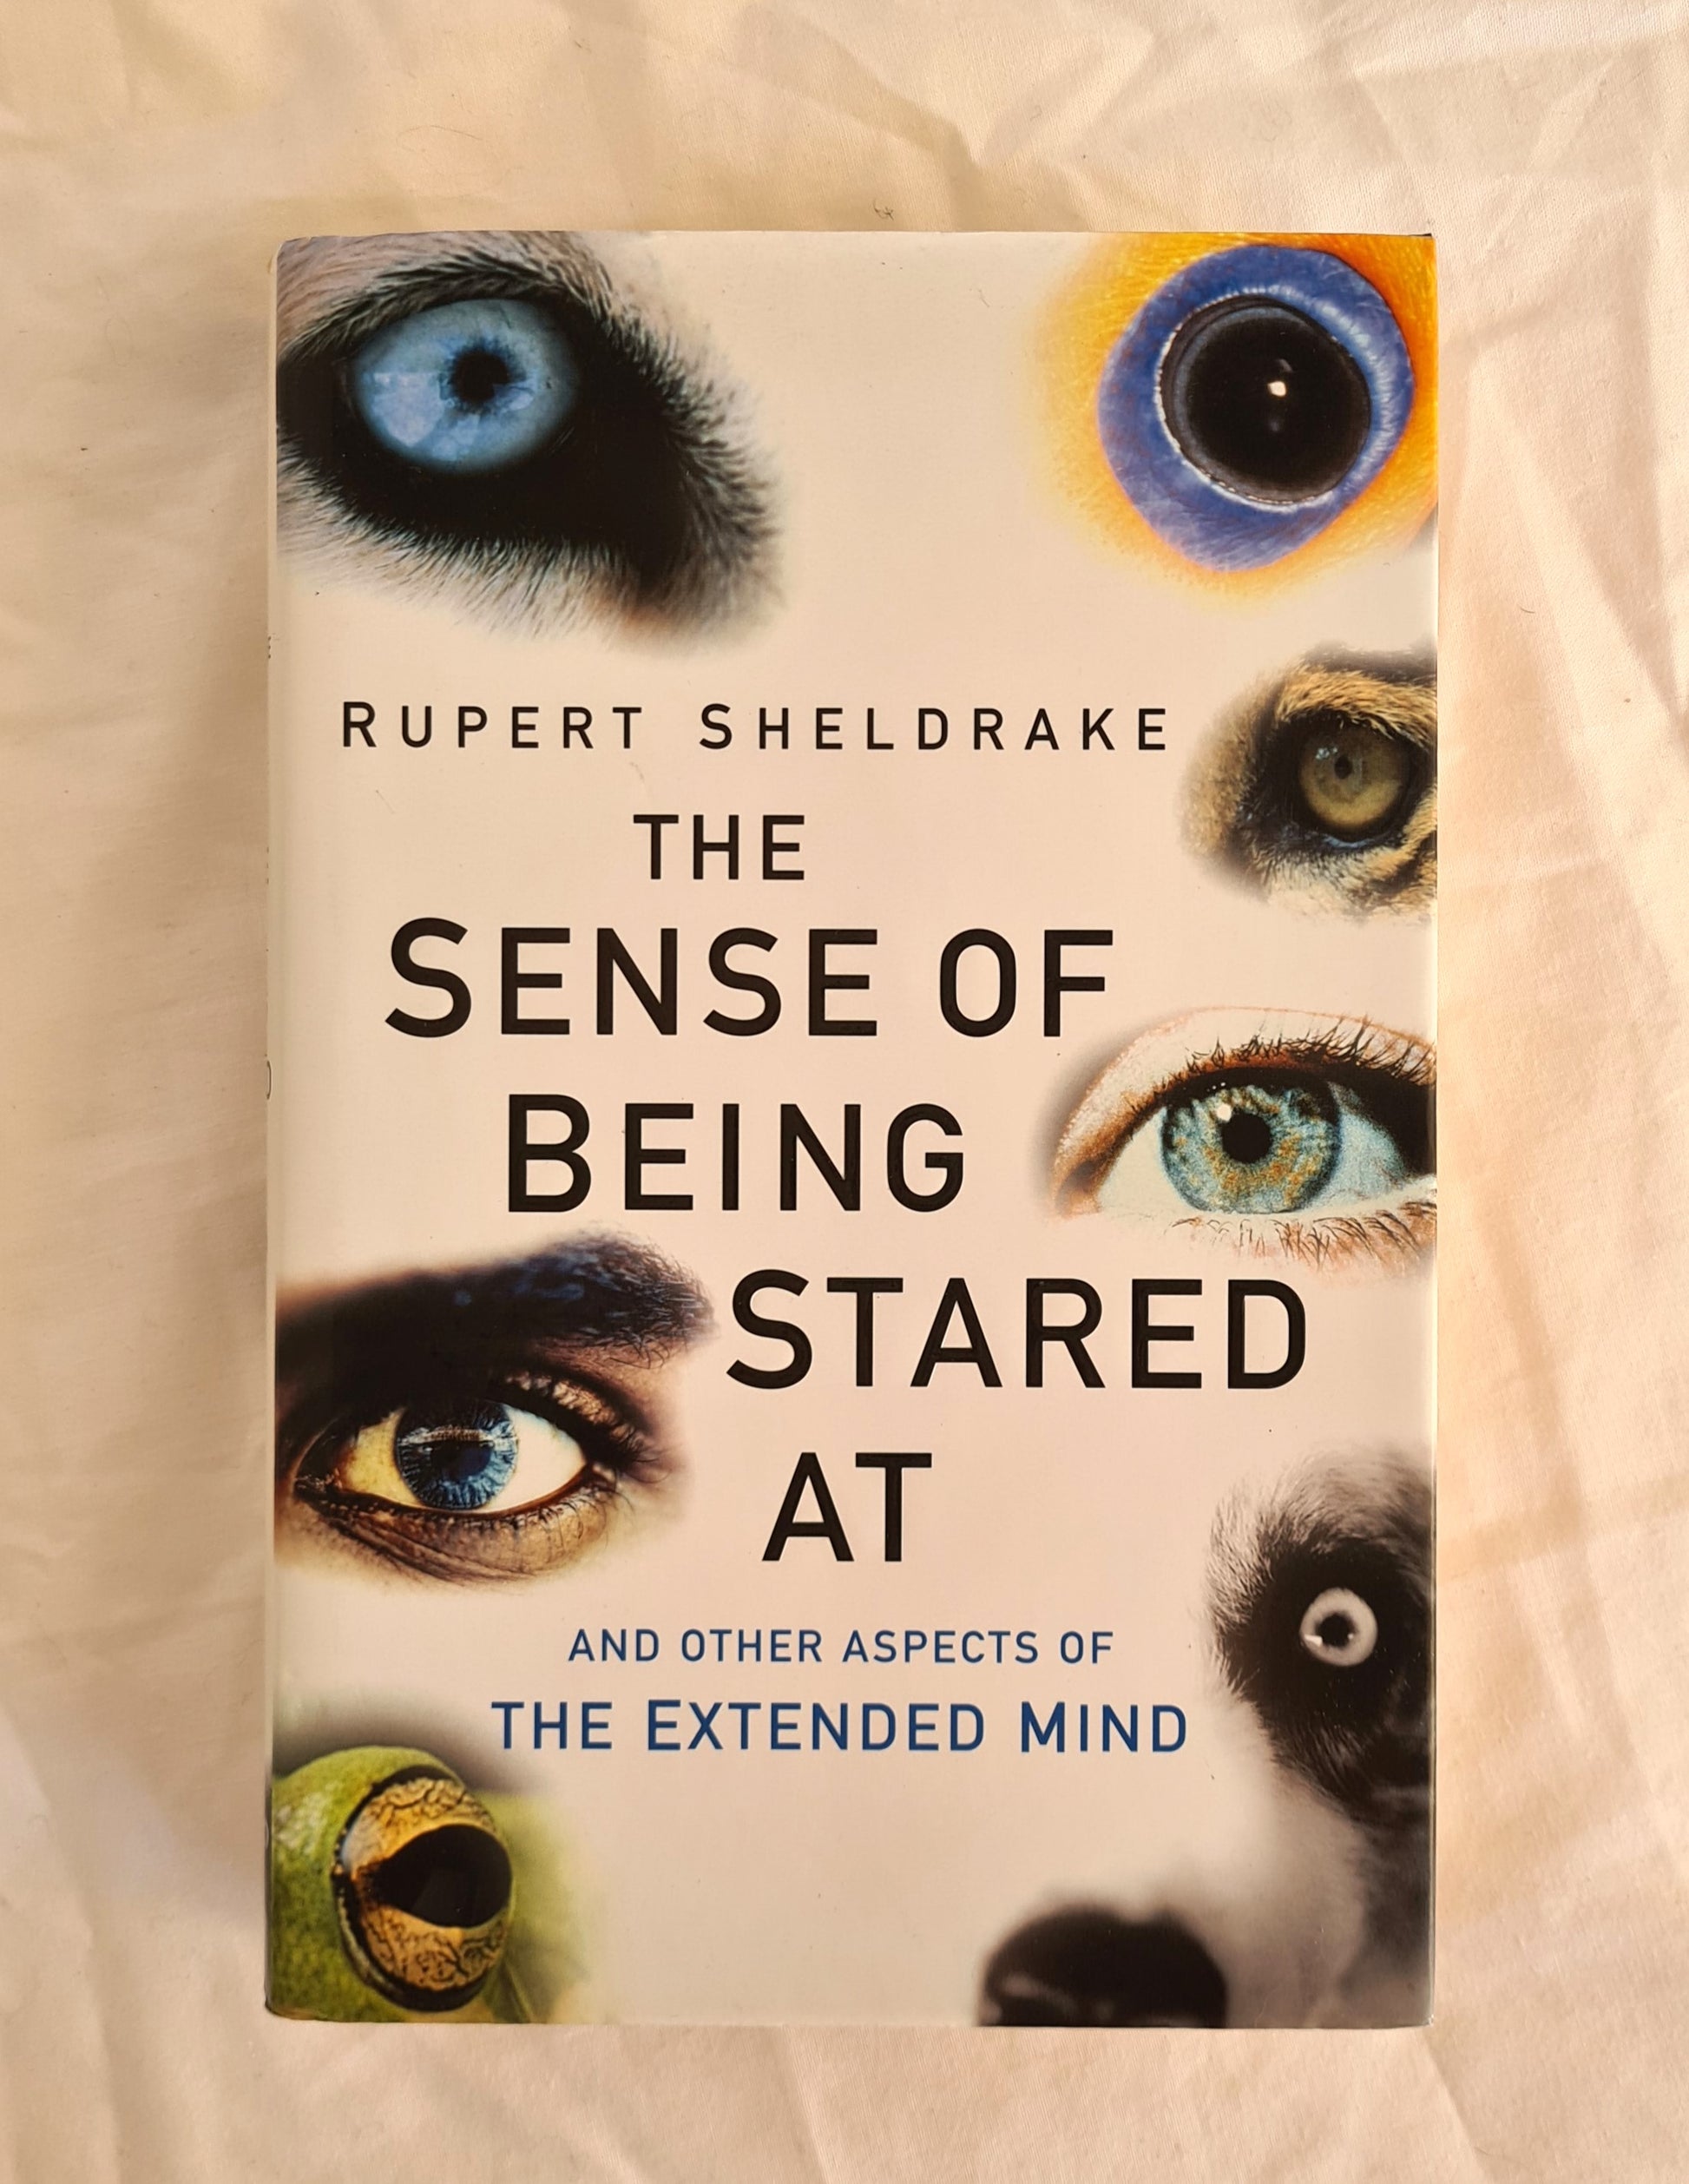 The Sense of Being Stared At  And Other Aspects of the Extended Mind  by Rupert Sheldrake